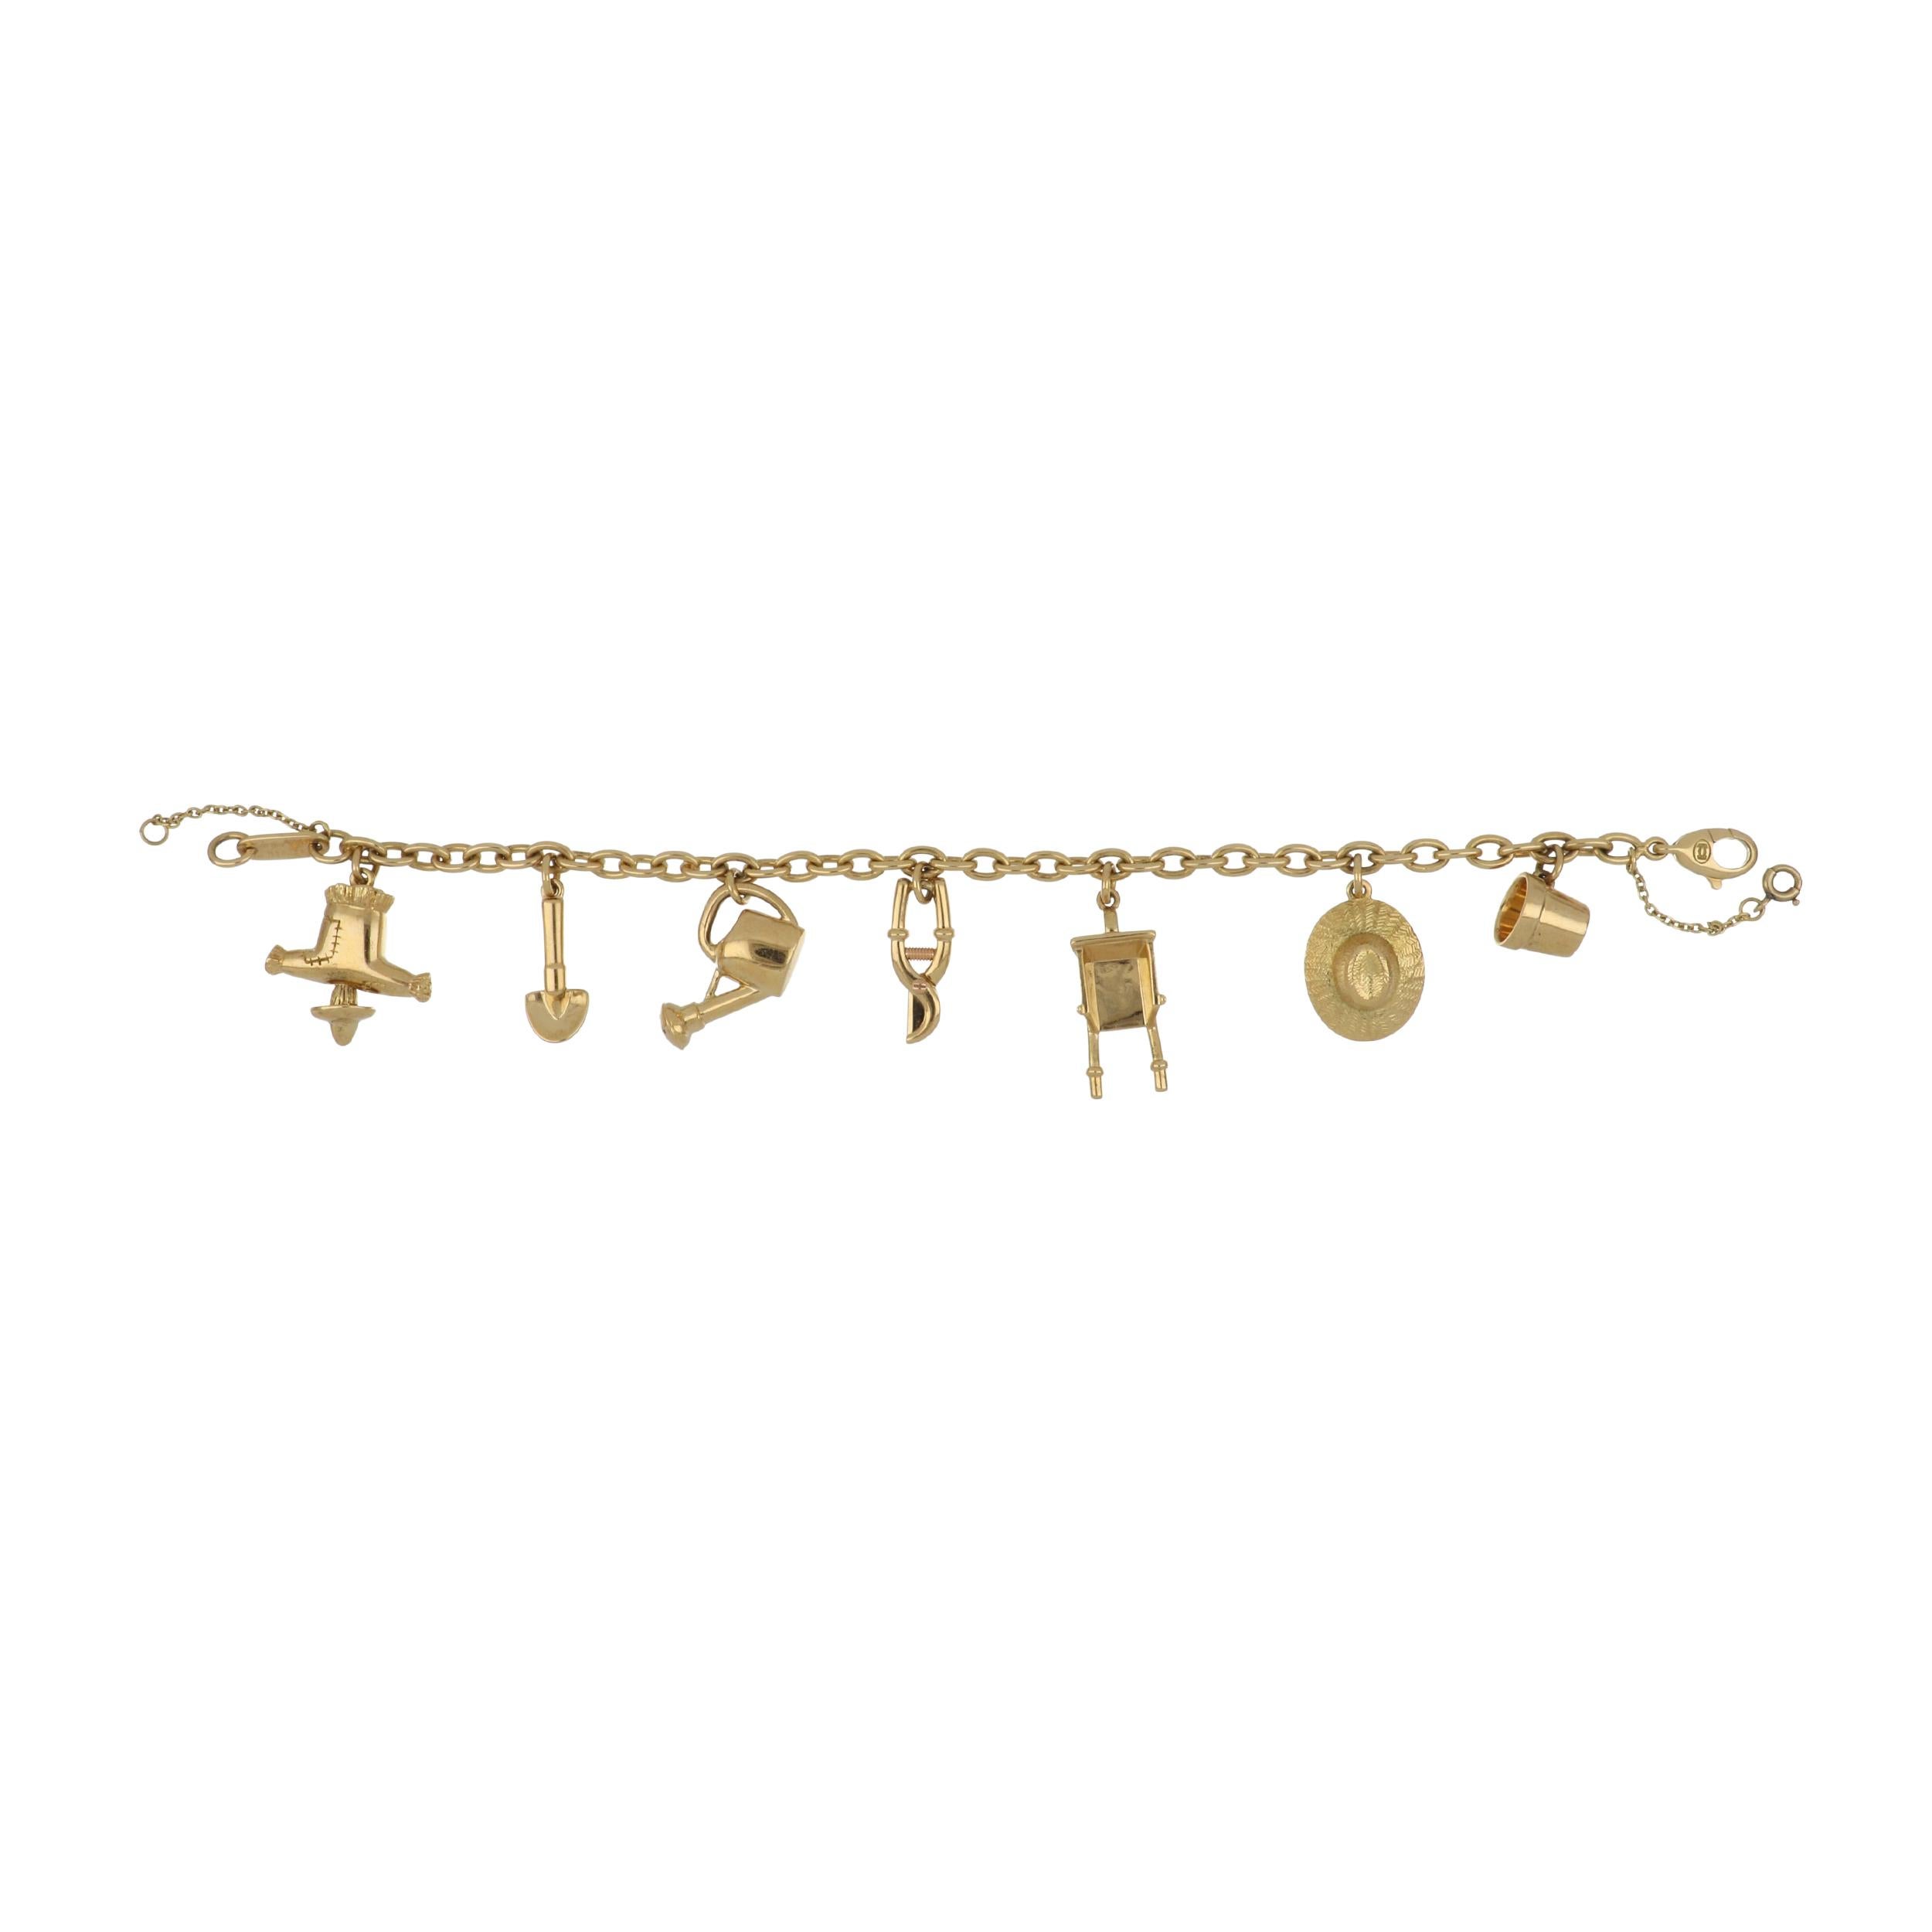 A vintage Cartier 18K yellow gold charm bracelet with gardener motif charms. Charms include a scarecrow, spade, watering can, pruning shears, wheel barrow, wide-brimmed hat, and a flower pot. Dated 1994. The bracelet measures 7 inches in length with